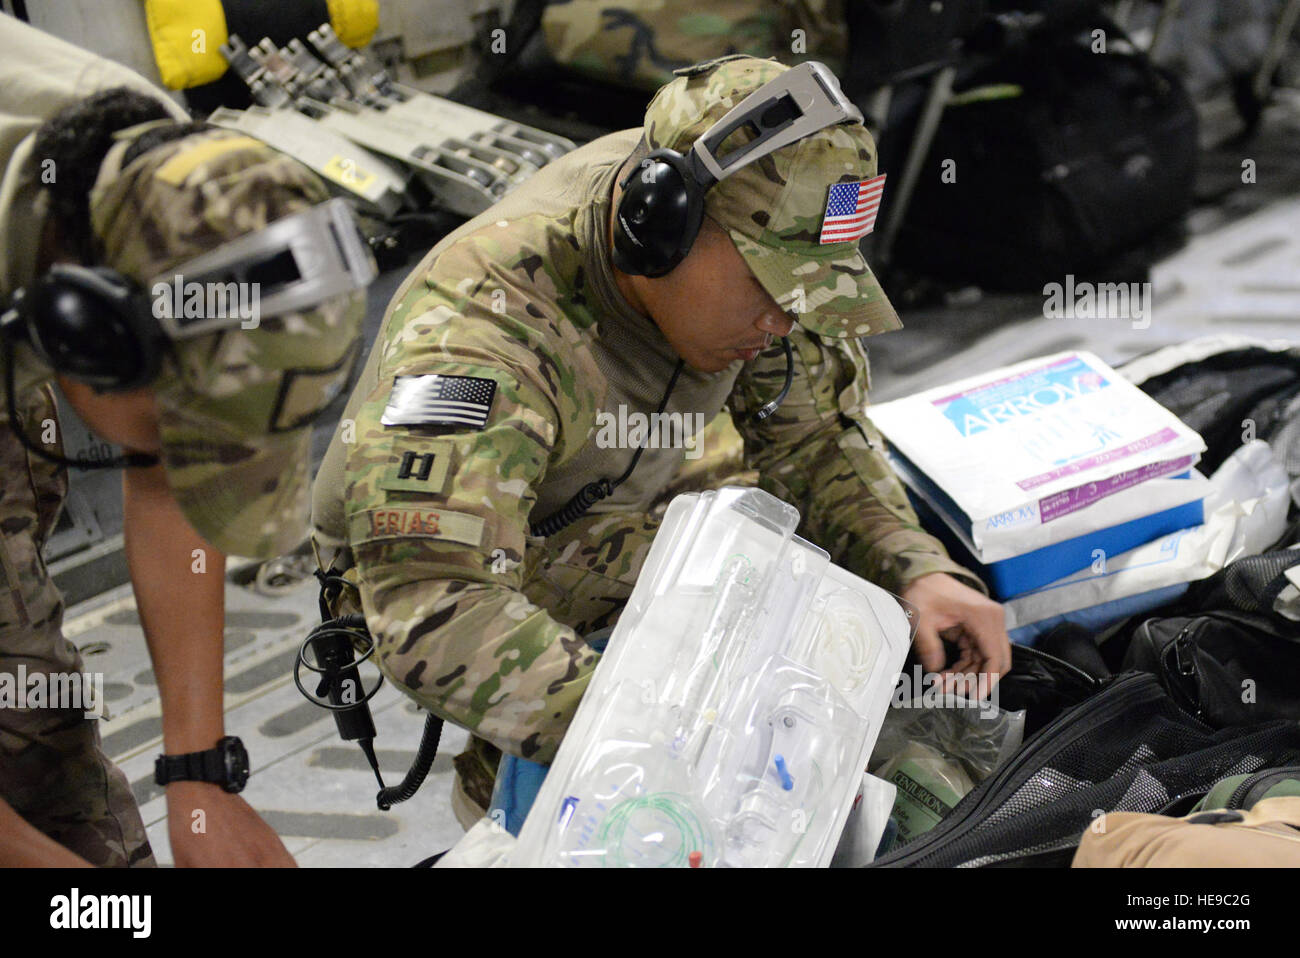 U.S. Air Force Capt. Jason Frias, 455th Expeditionary Aeromedical Evacuation Squadron Critical Care Air Transport Team critical care nurse deployed from the 60th Medical Group at Travis Air Force Base, Calif., checks in equipment bags for supplies during an aeromedical evacuation mission aboard a C-17 Globemaster III aircraft from Bagram Airfield, Afghanistan, to Ramstein Air Base, Germany, Aug. 9, 2015. The 455th EAES’ CCATT is a three-person, highly specialized medical team consisting of a physician who specializes in an area of critical care or emergency medicine, a critical care nurse and  Stock Photo